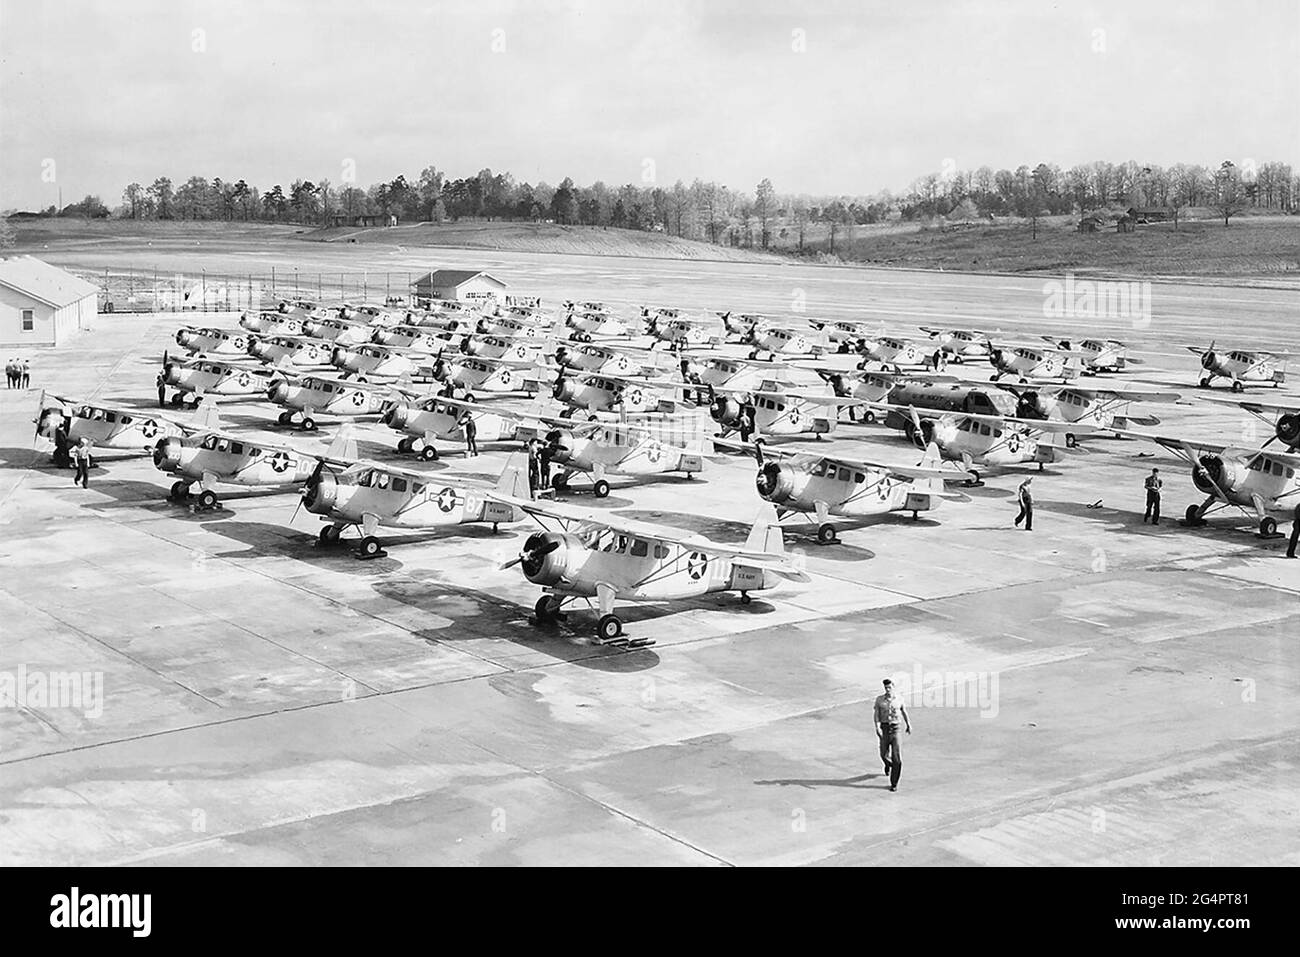 World War II training aircraft staged on the tarmac of the Atlanta Naval Air Station – the current site of Peachtree-Dekalb Airport in Chamblee, Georgia. (Photo: April 15, 1944) Stock Photo